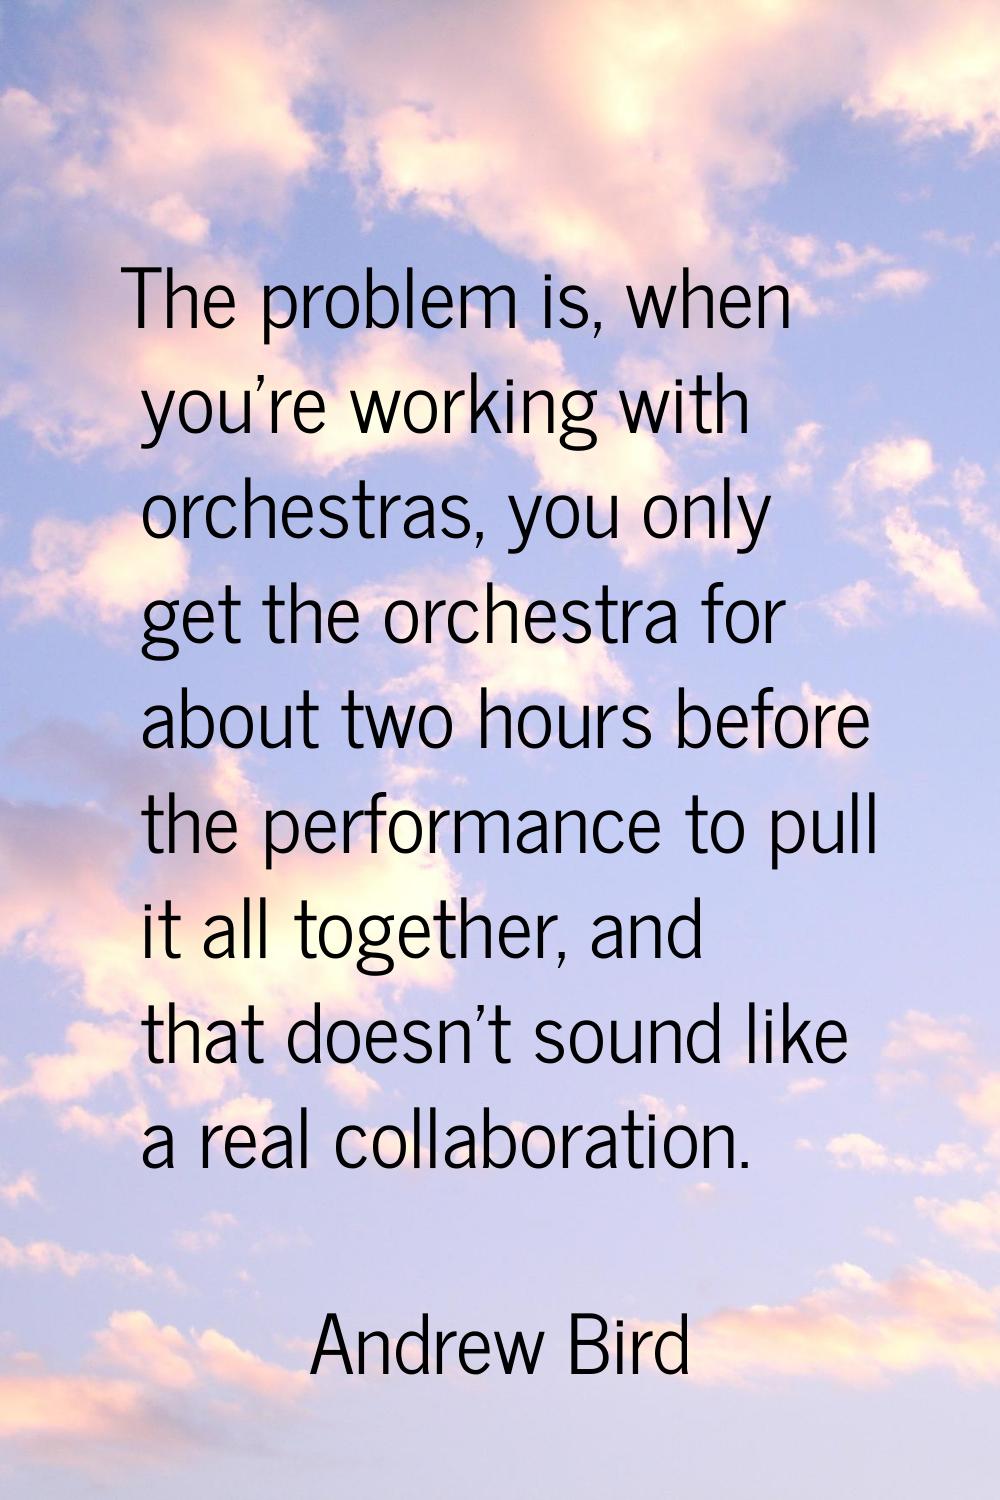 The problem is, when you're working with orchestras, you only get the orchestra for about two hours